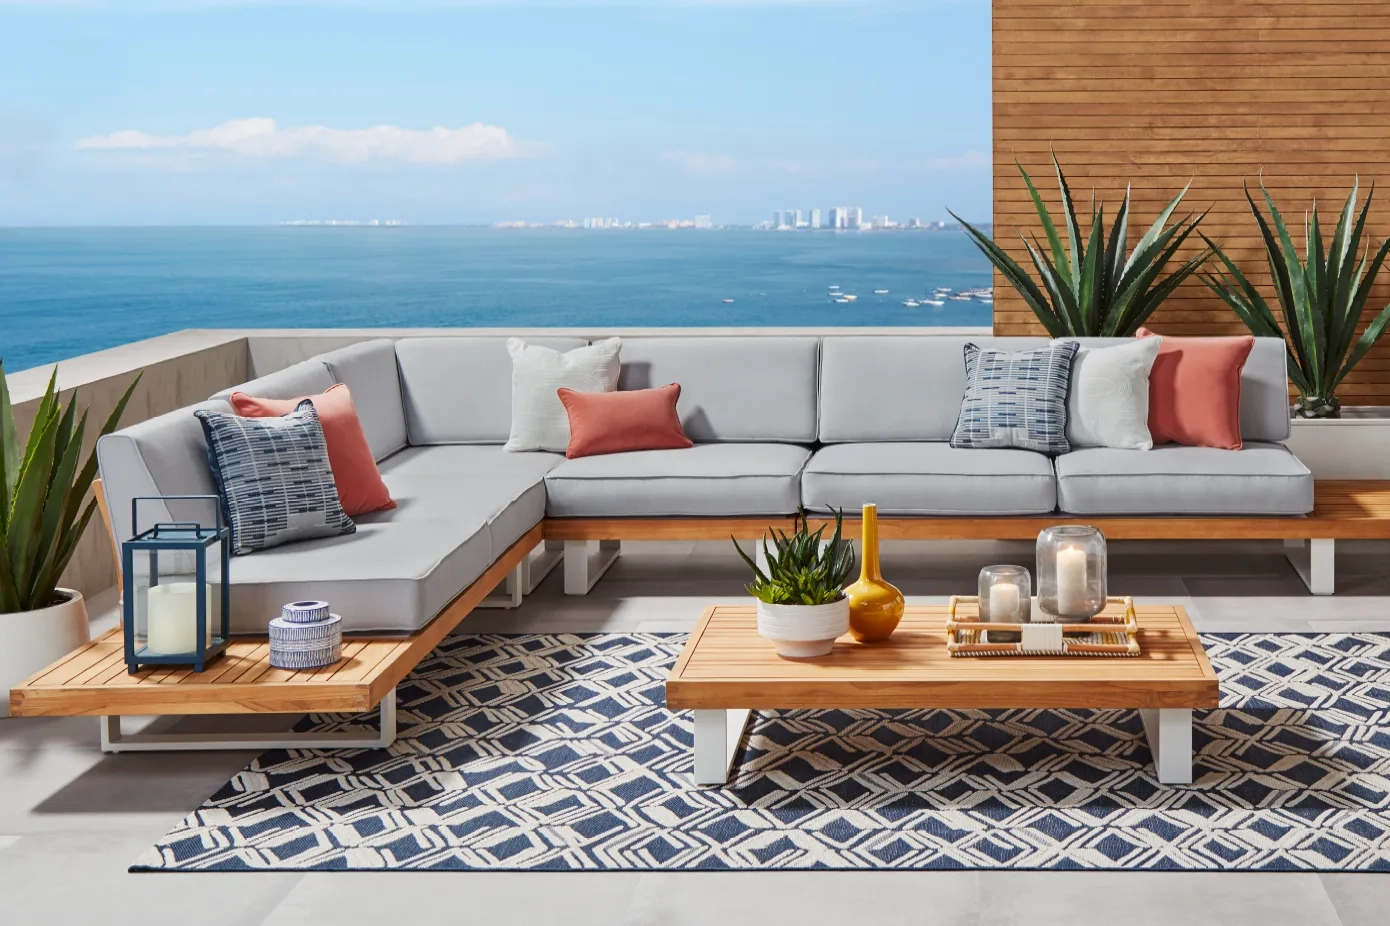 https://assets.roomstogo.com/Category_ShopPatioSpaces_FL_Seating_Tiles_VO_695x463.png?f=webp&cache-id=Category_Shop_Patio_Spaces_FL_Seating_Tiles_VO_695x463_a74bfe2e66